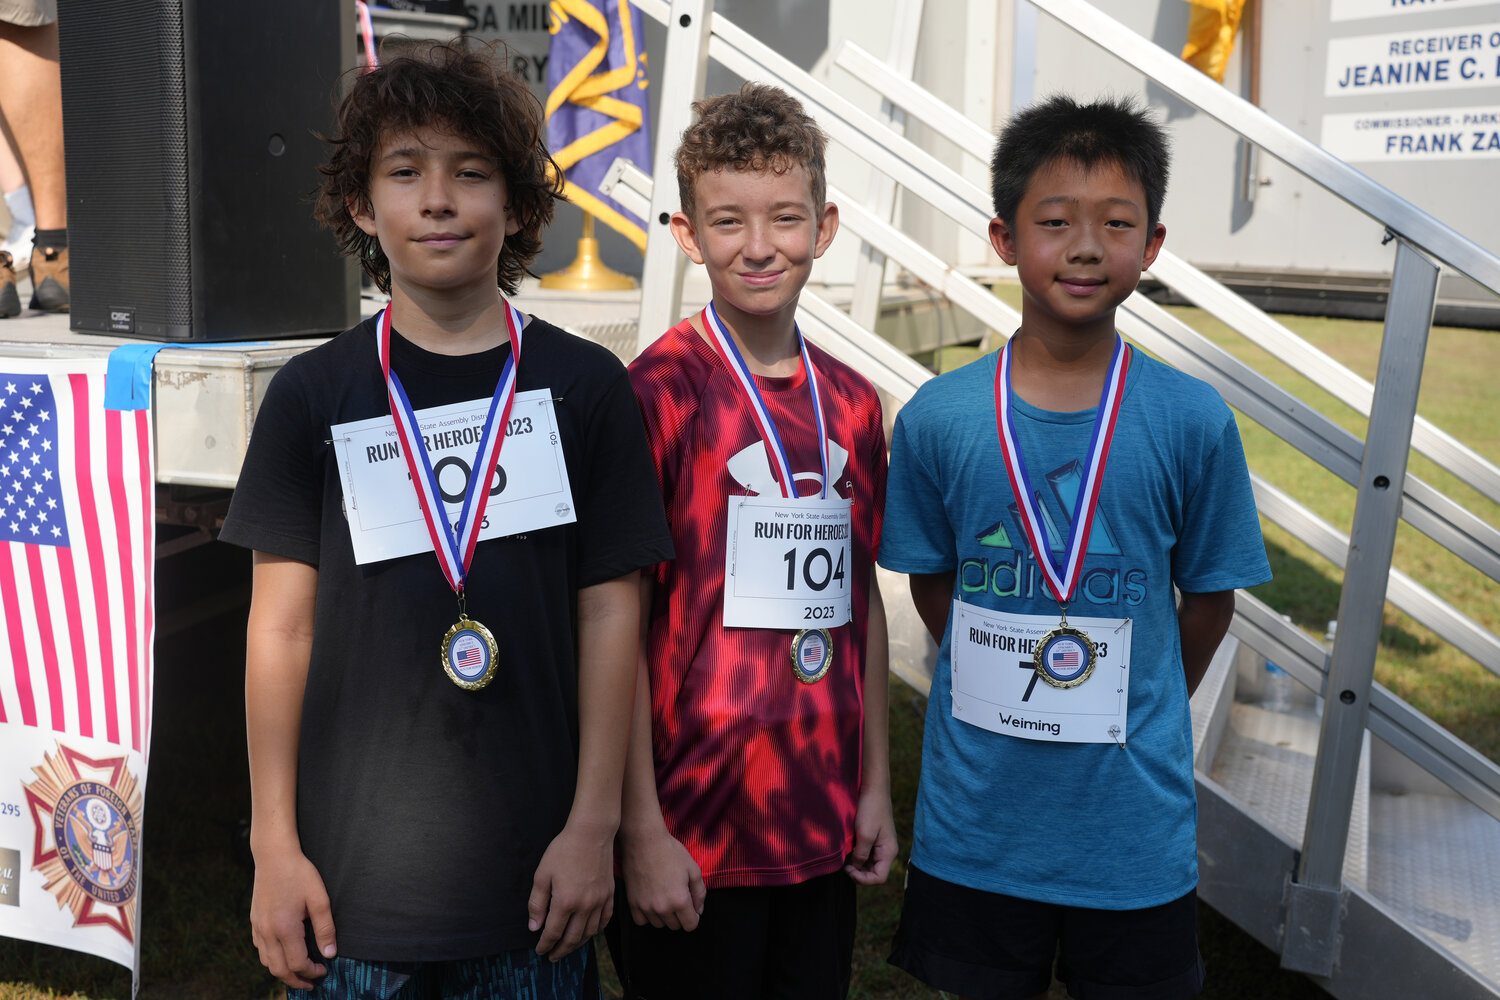 George Palomino from Rockville Centre, Fabian Palomino from Rockville Centre, and Lucas Zou from Williston Park participate in the 5k ‘Run for Heroes’ race.